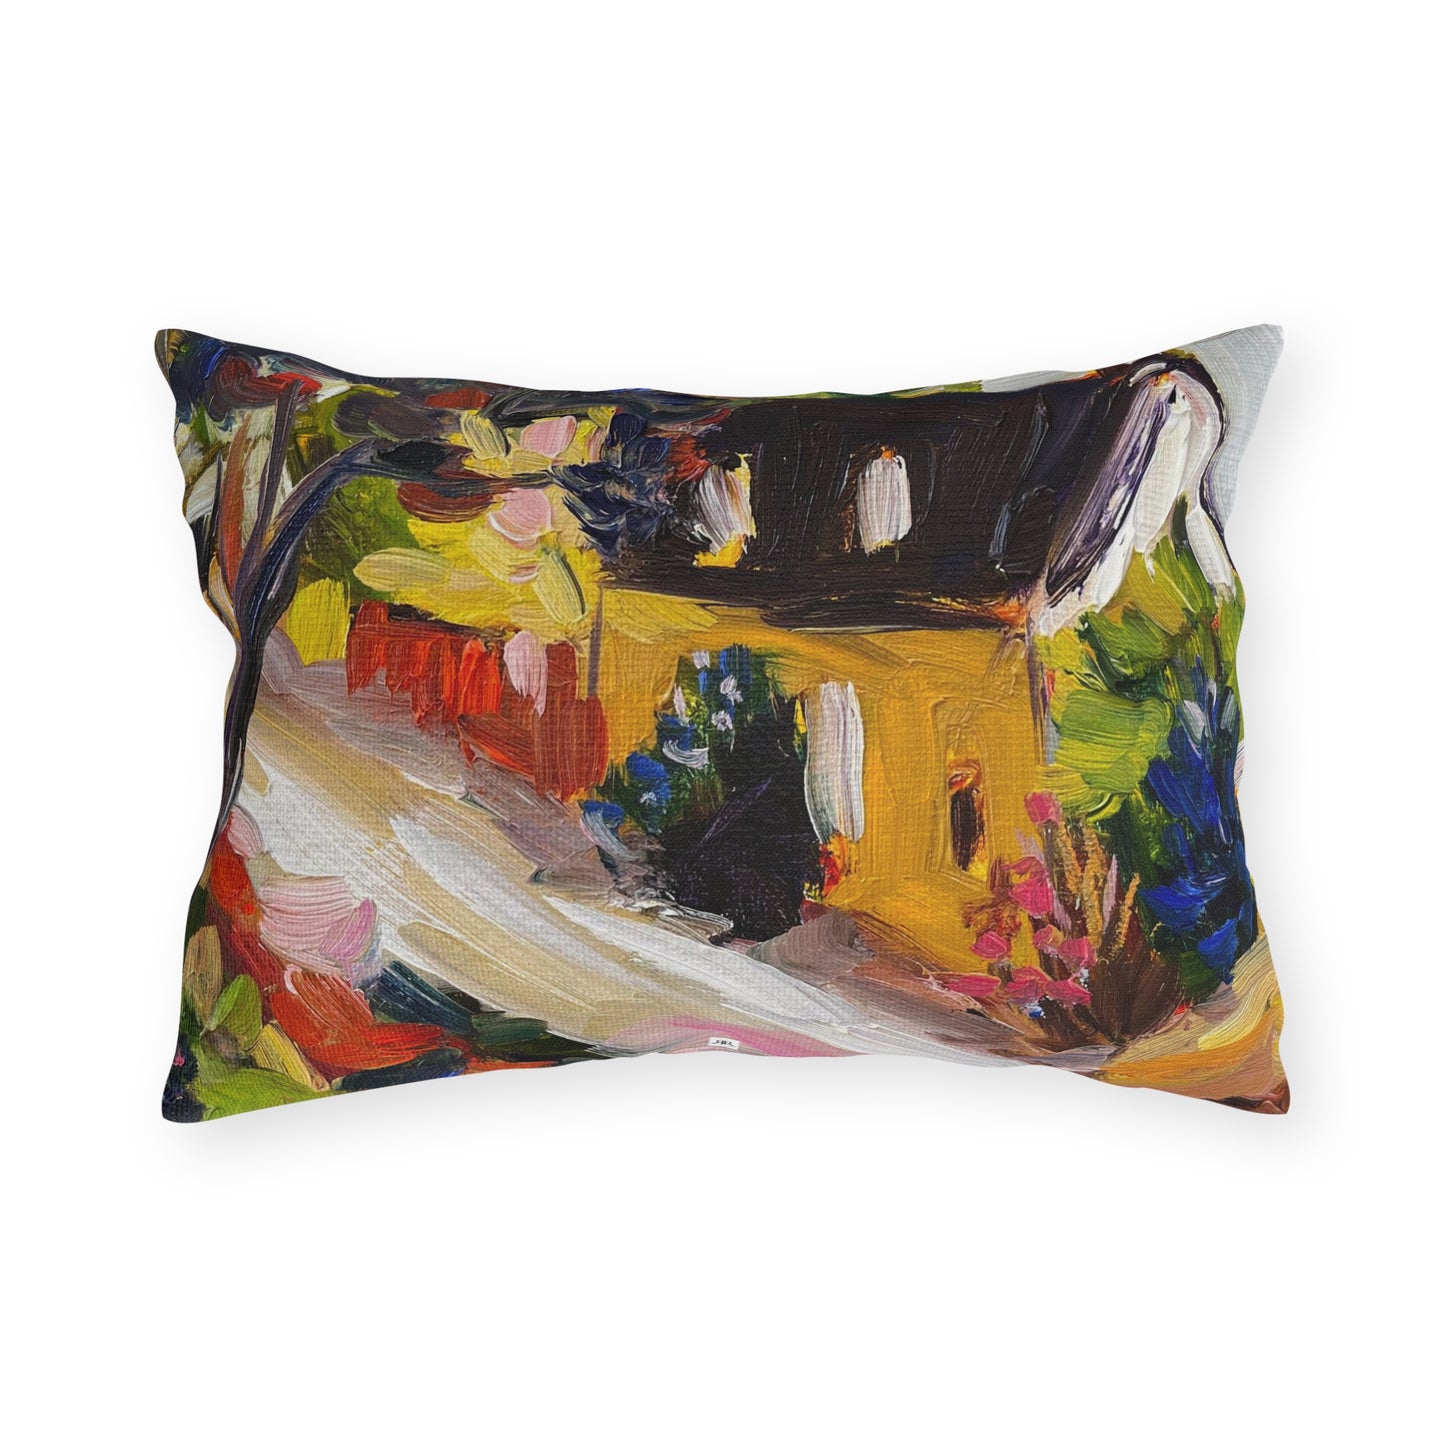 Snowshill- Cotswolds Outdoor Pillows